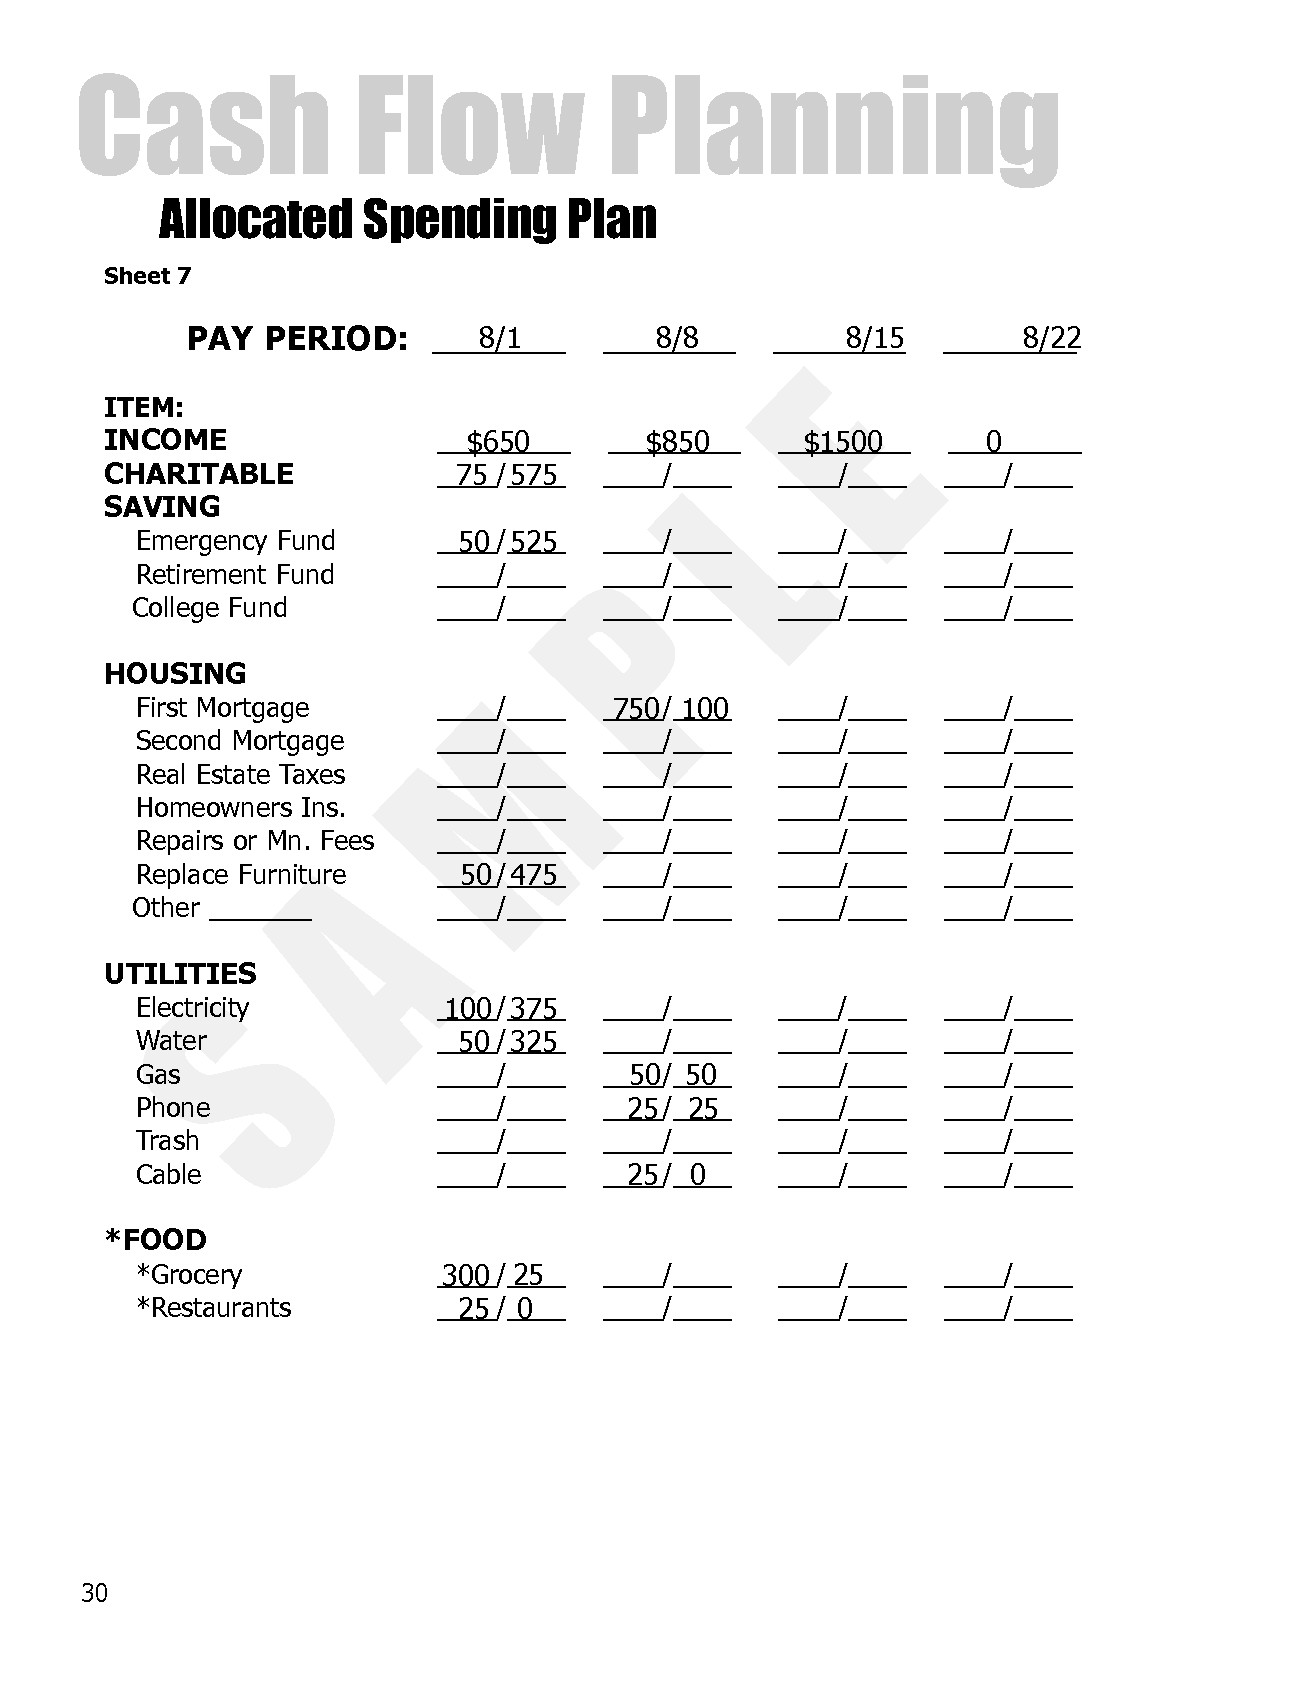 How To Use Dave Ramsey S Allocated Spending Plan Finance Document Budget